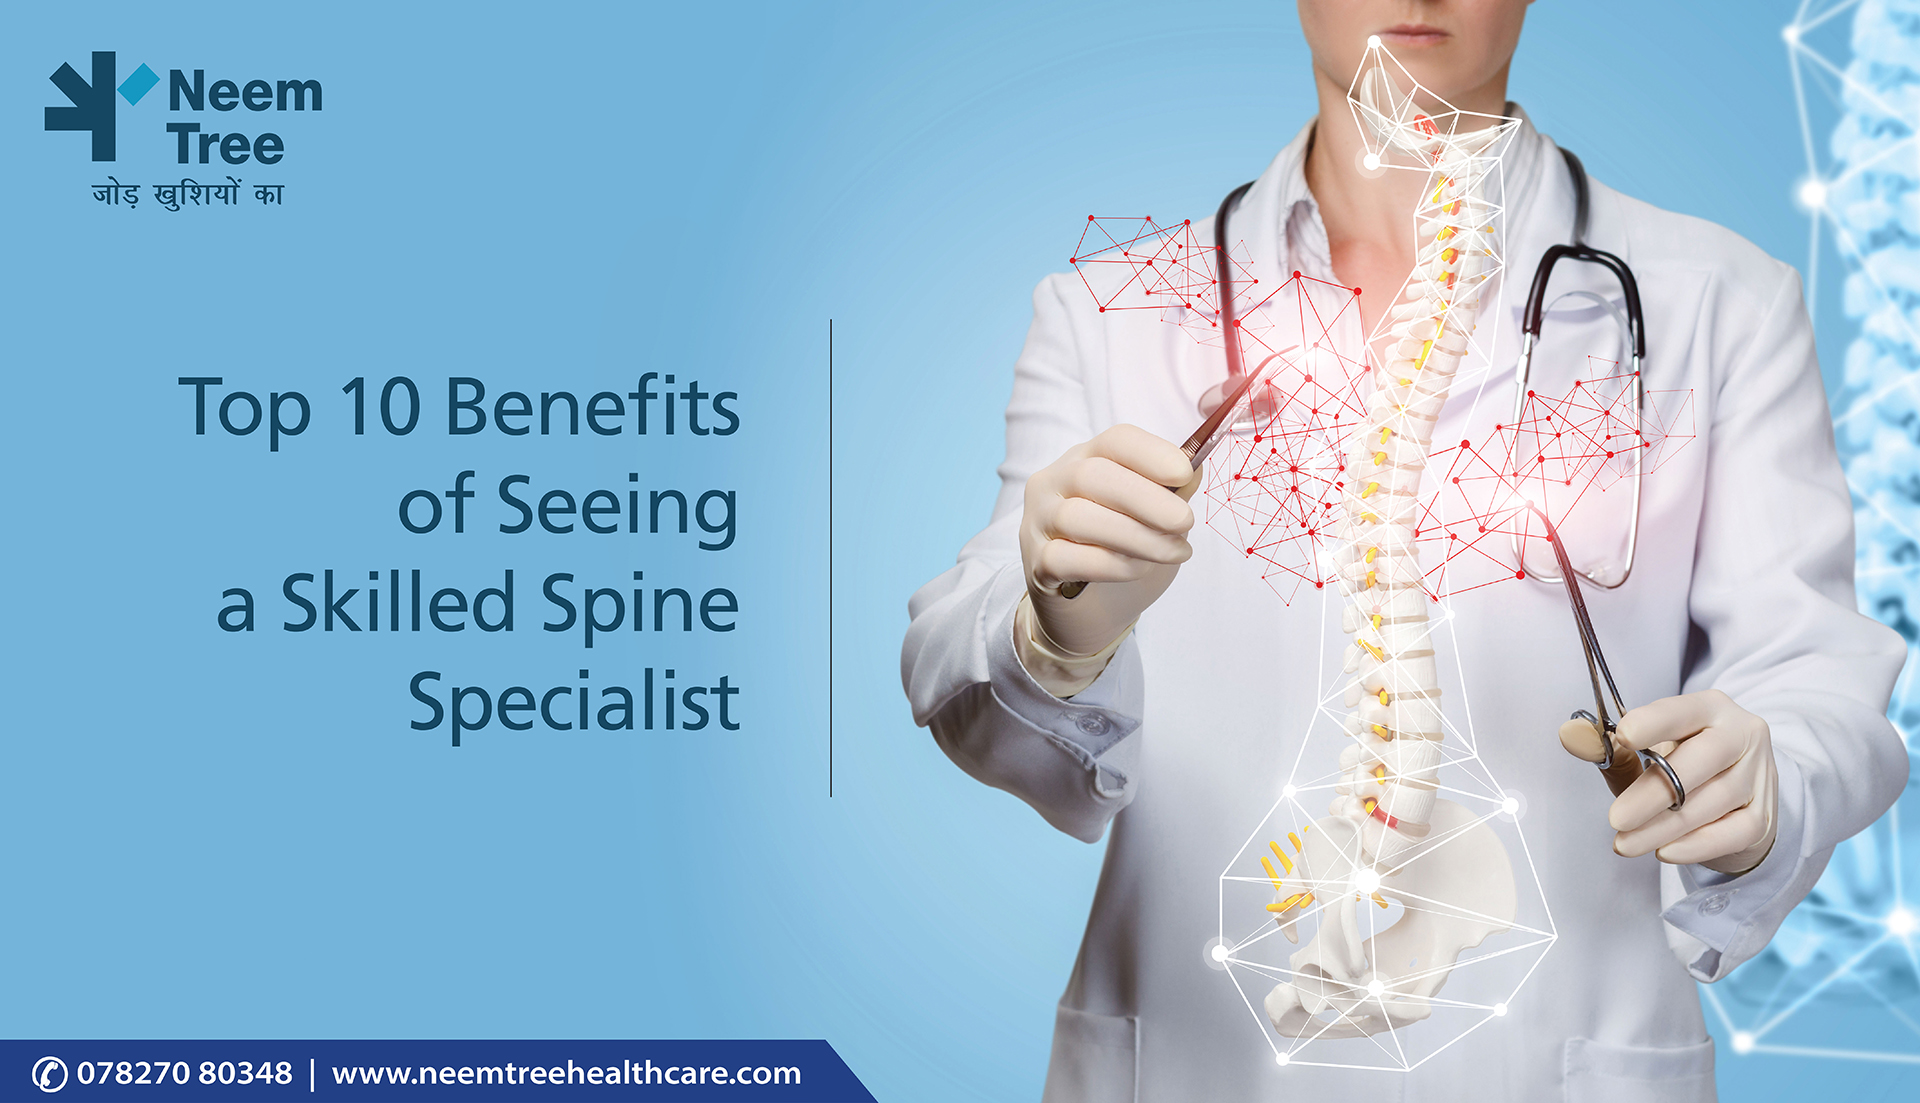 Top 10 Benefits of Seeing a Skilled Spine Specialist